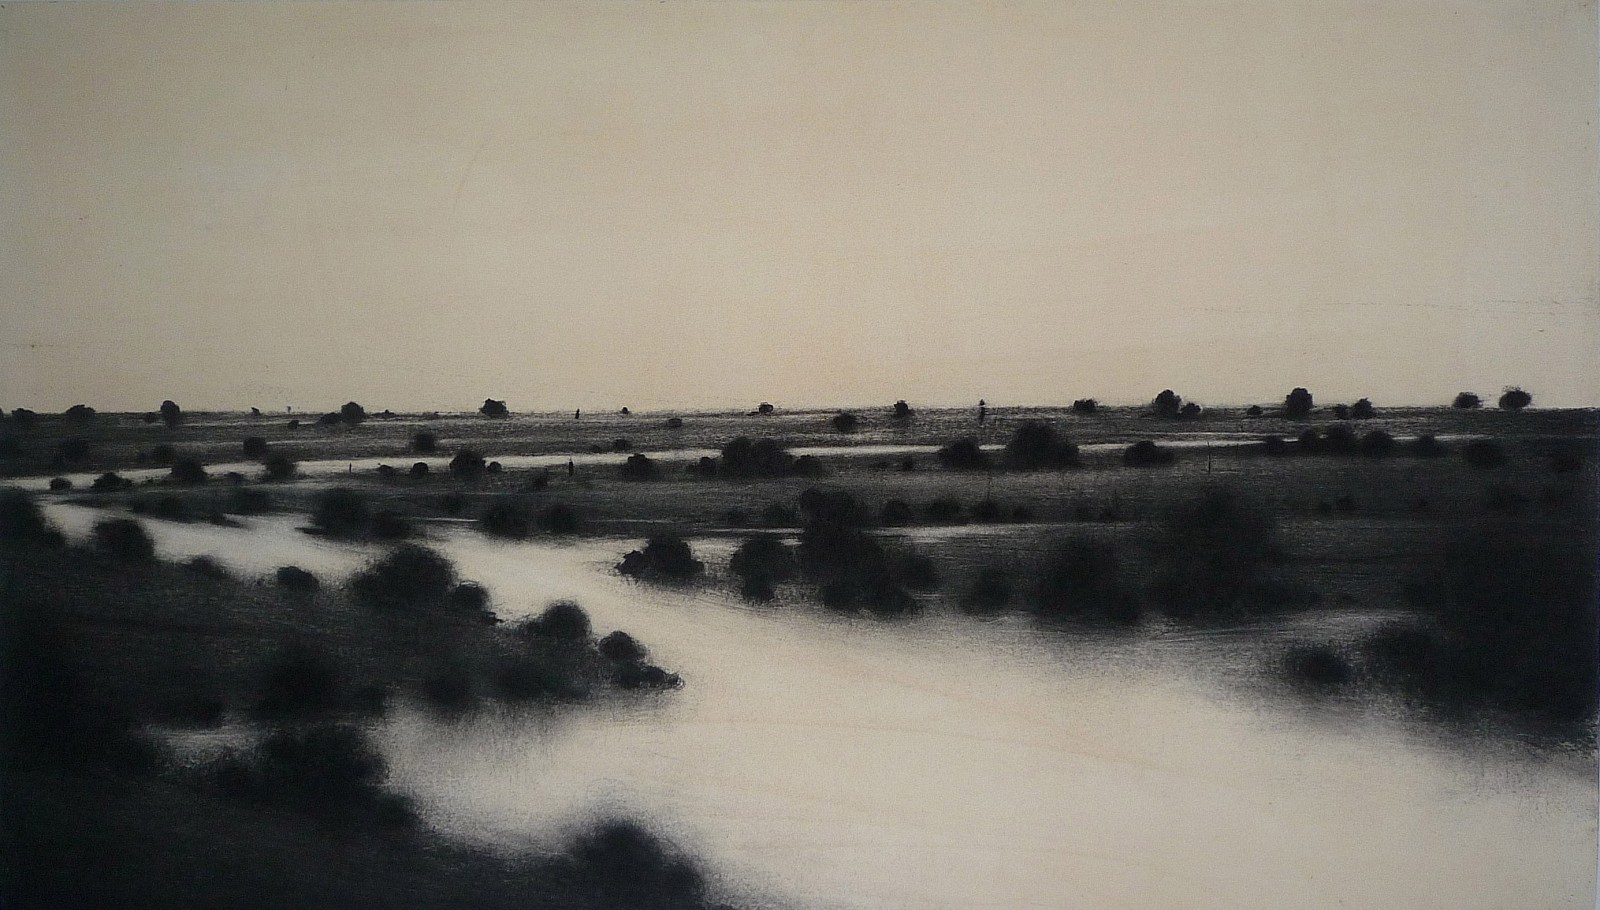 Nicolas Poignon
Water and Emptiness, 2012
charcoal on paper, 38 x 65 in.